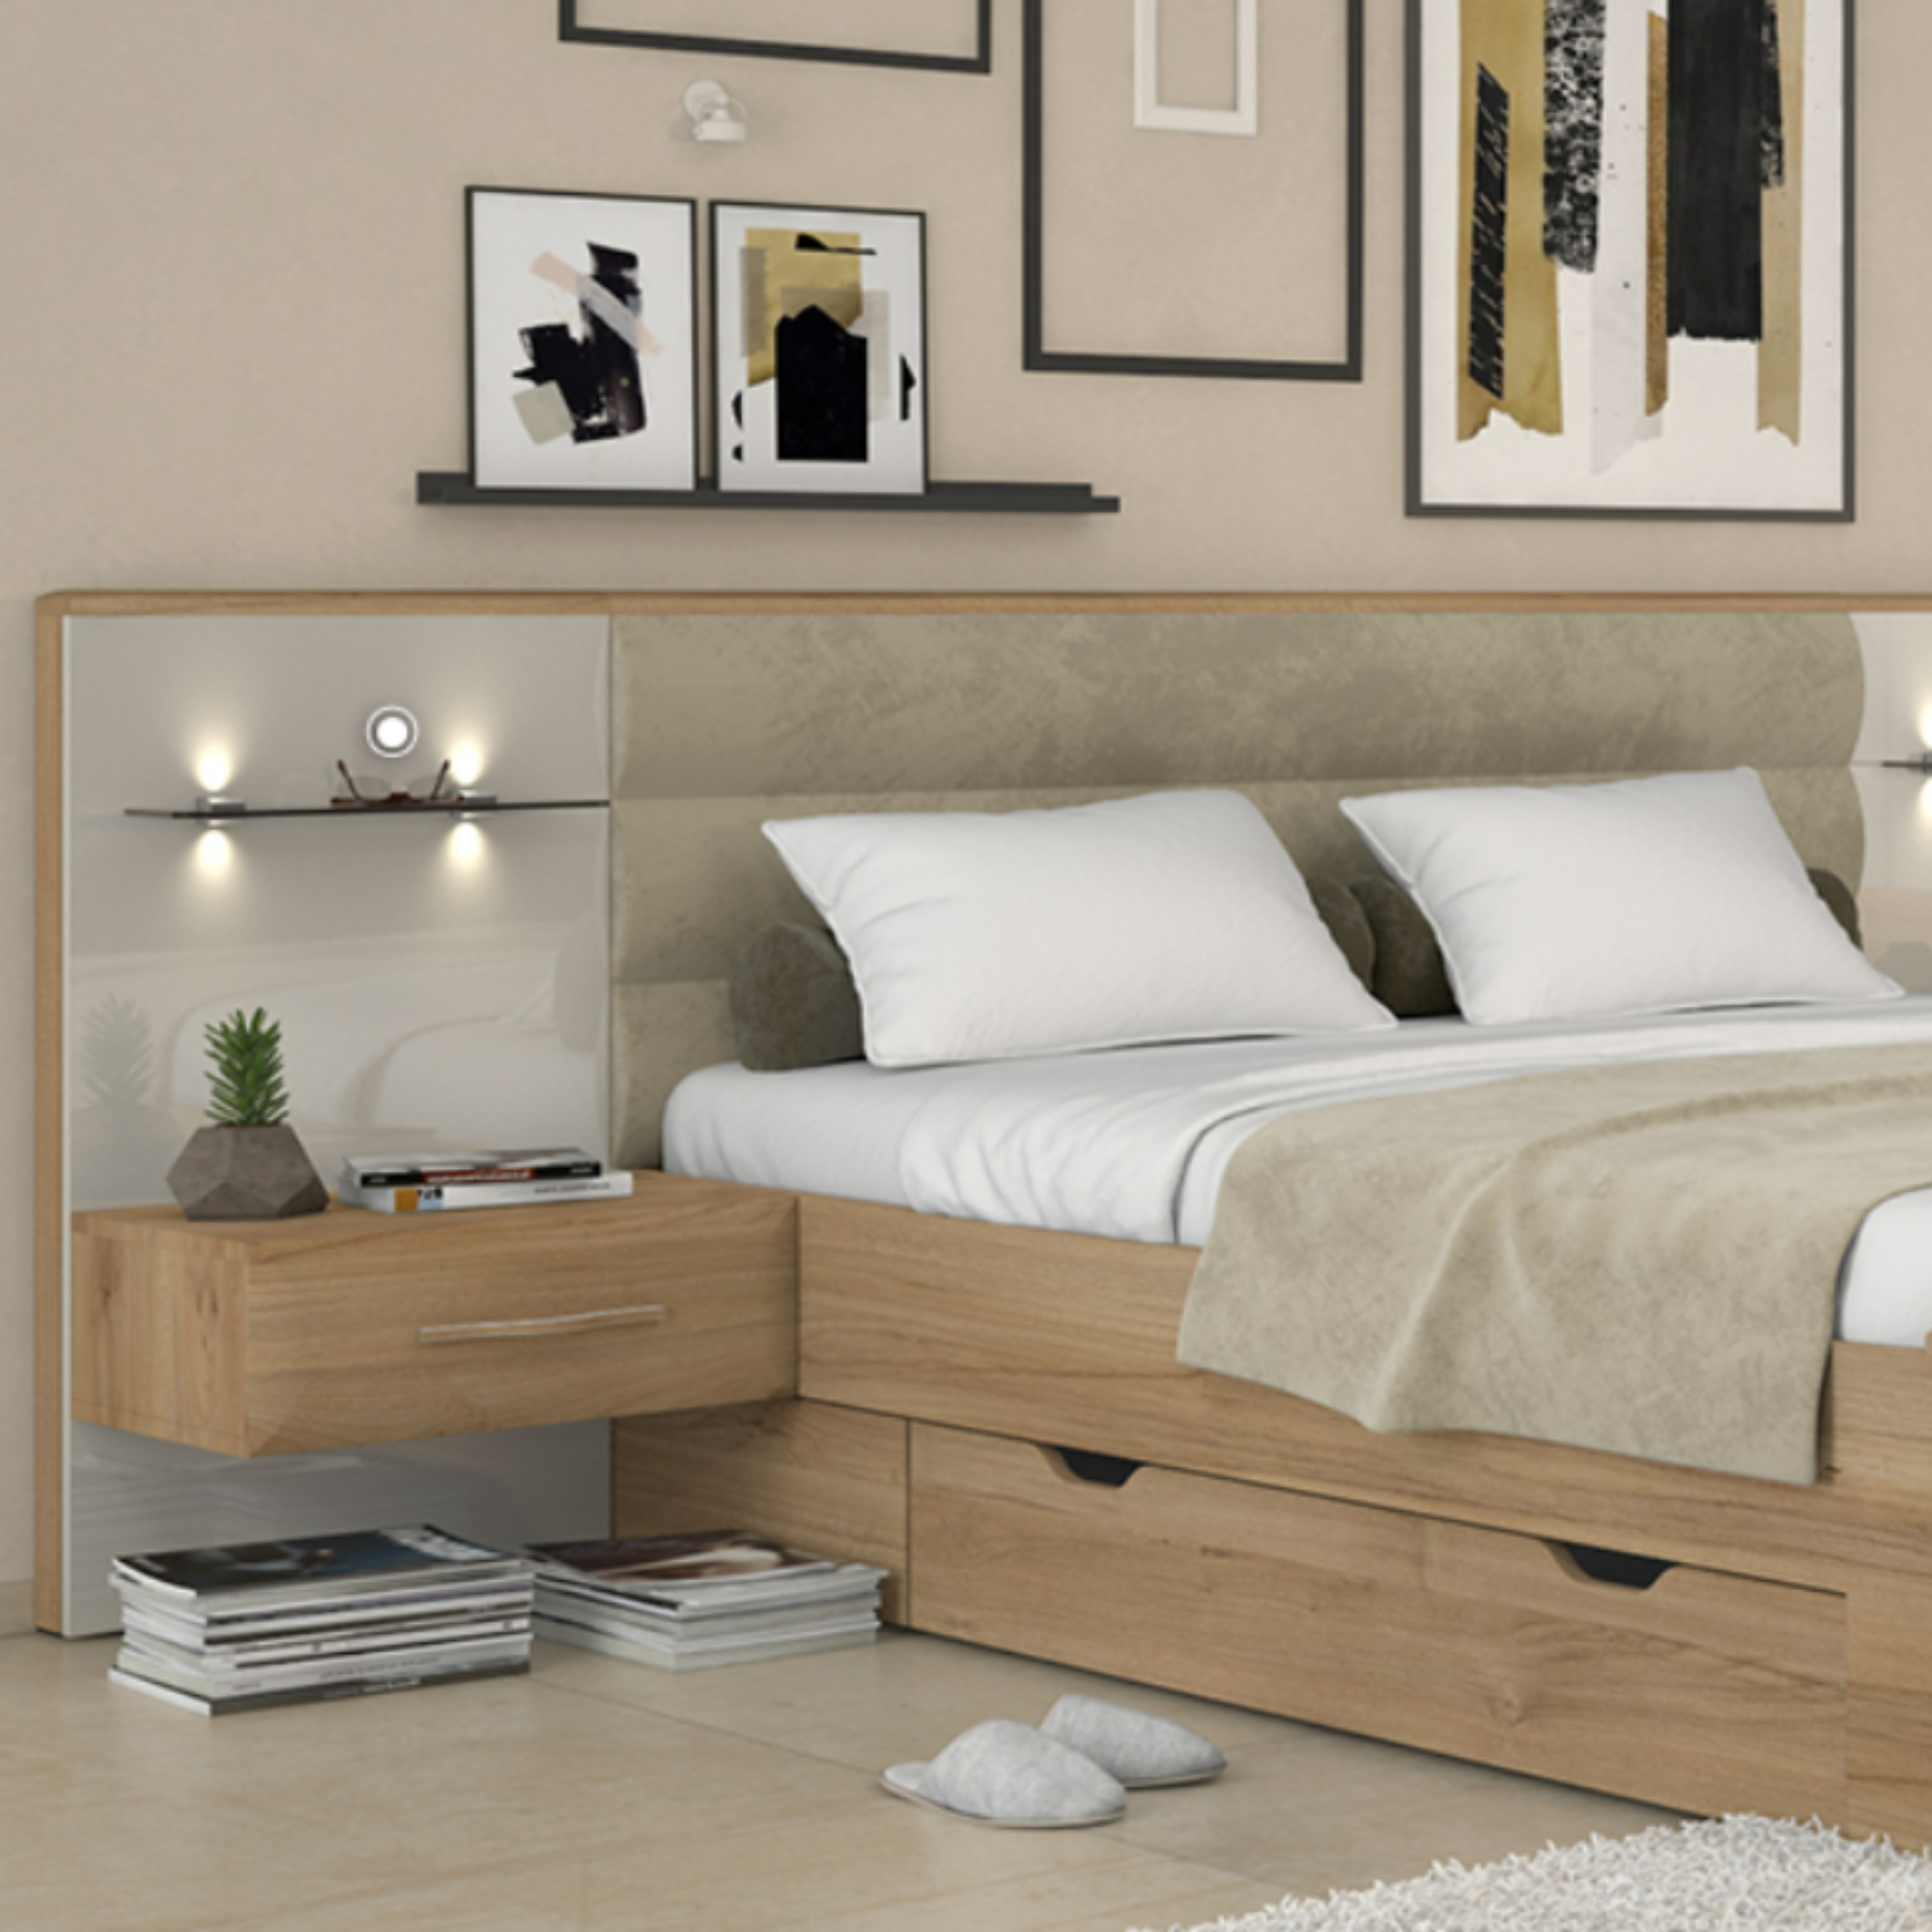 Gala King Size Platform Bed with 2 Nightstands and storage - Upholstered Plush Headboard and Pacific Walnut Wood Décor - Furniture.Agency